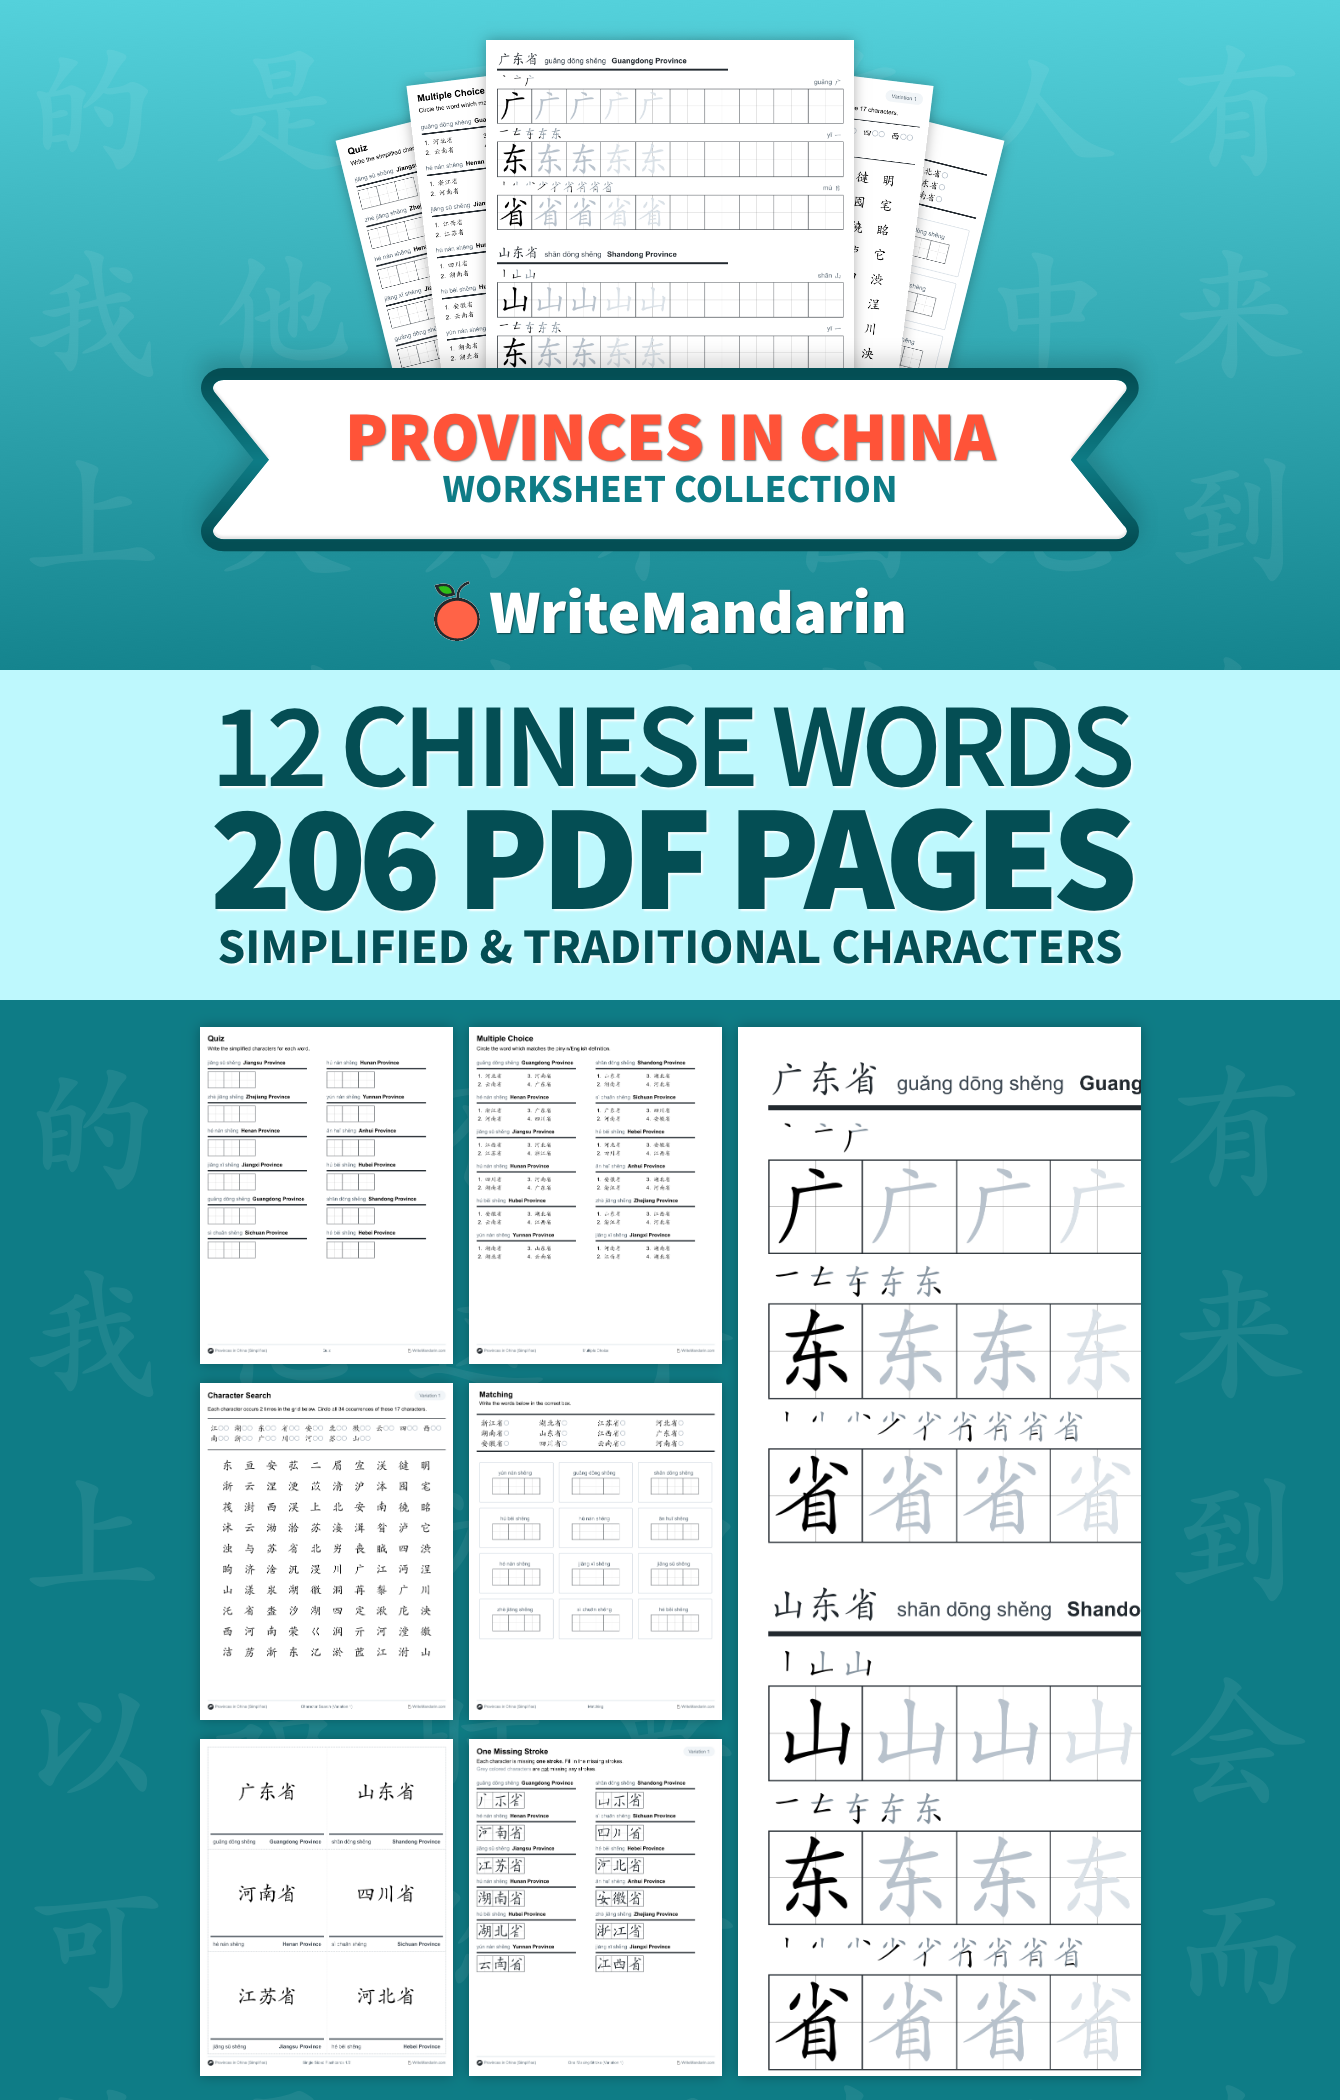 Preview image of Provinces in China (Set 1) worksheet collection